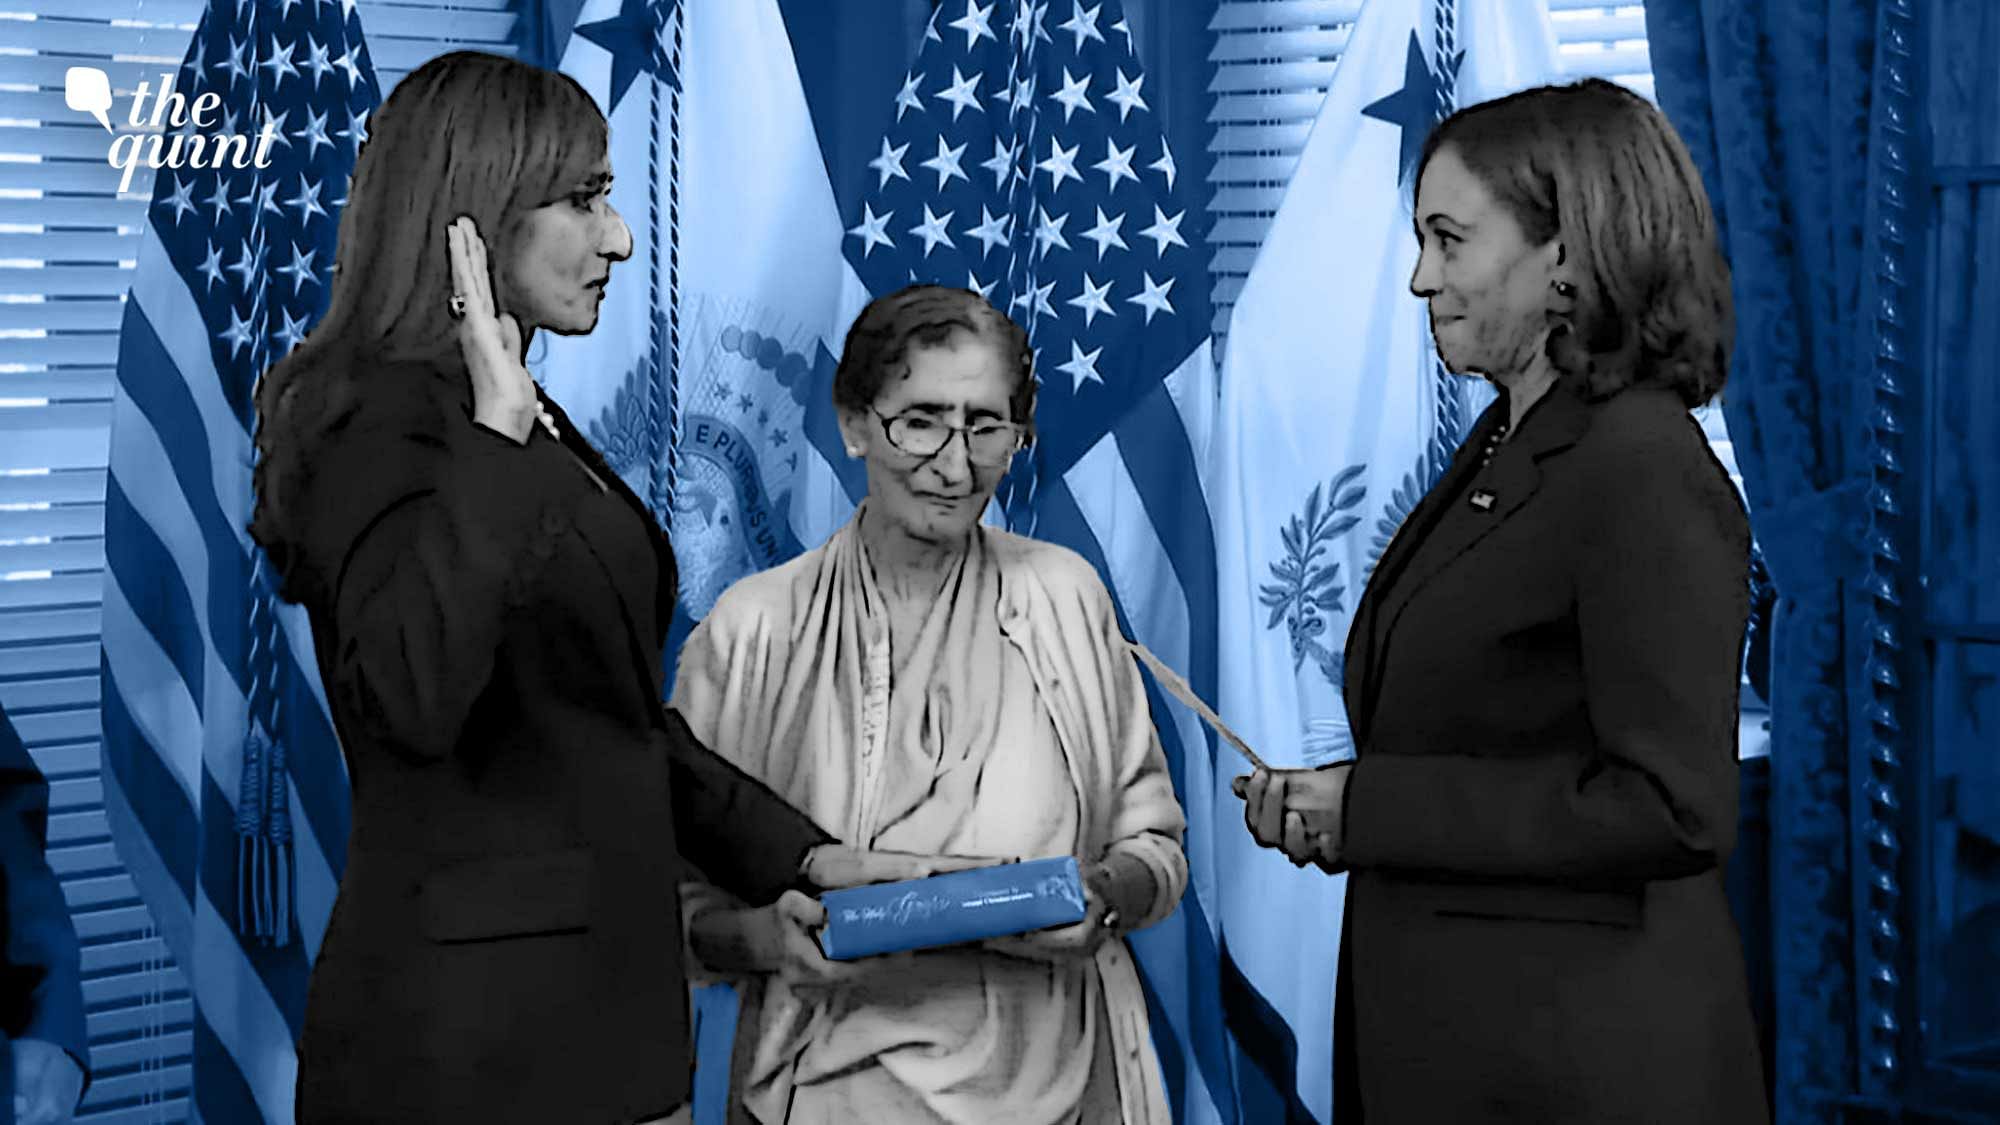 <div class="paragraphs"><p>Shefali Razdan Duggal being administered her oath as US Ambassador to the Netherlands by VP Kamala Harris. She took the oath by swearing on the Bhagavad Gita in the presence of her mother.&nbsp;</p></div>